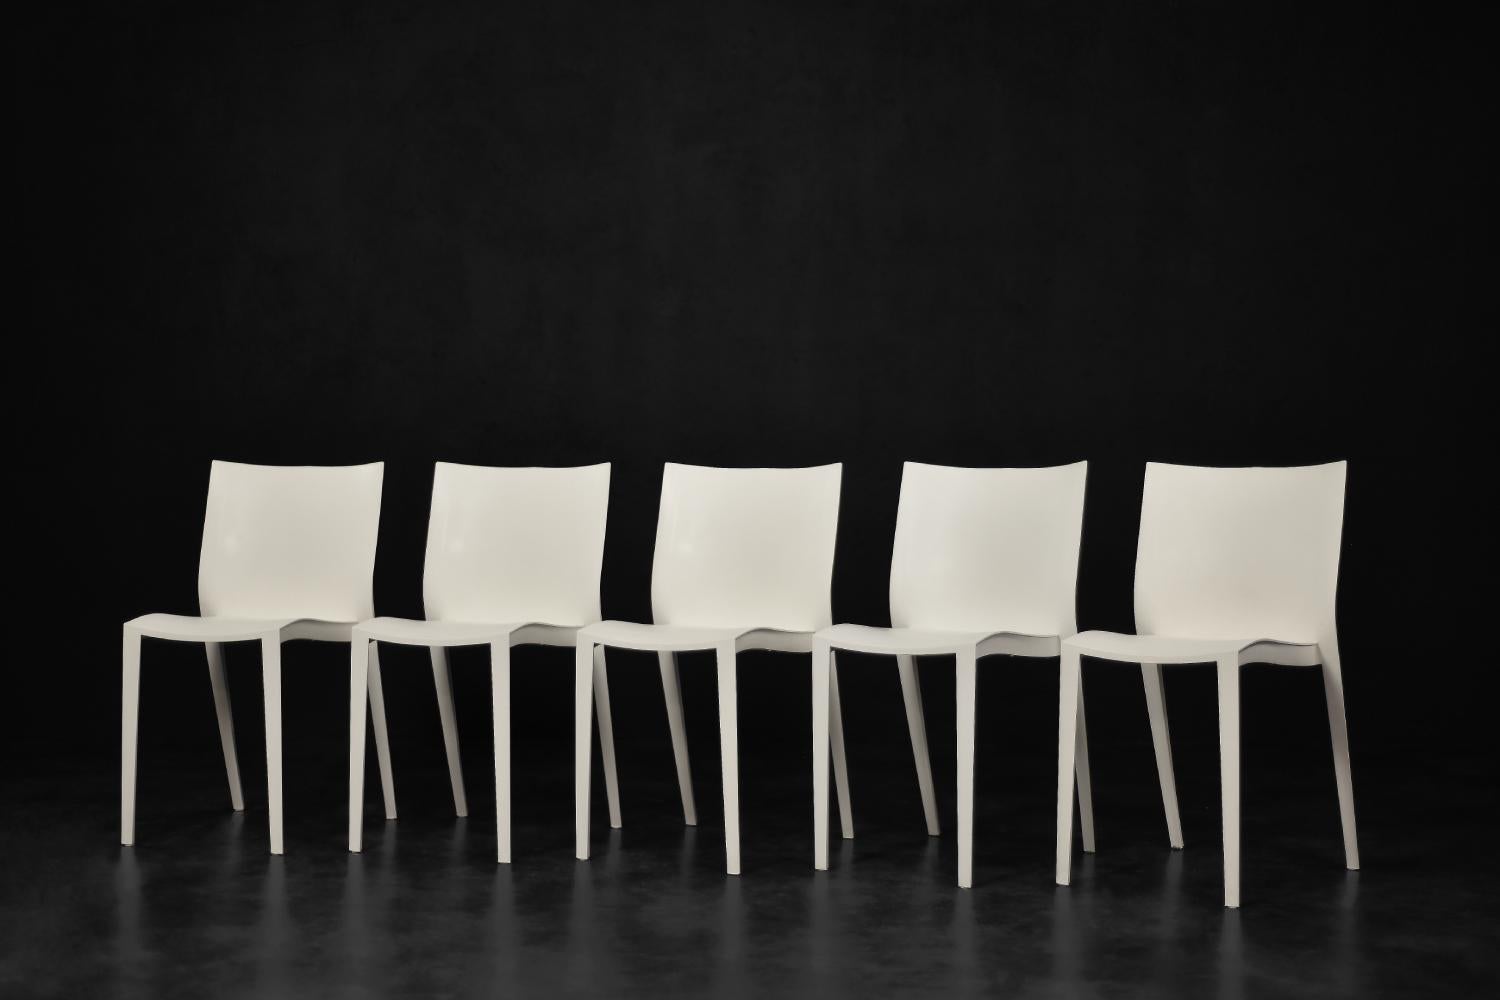 This set of five Slick Slick chairs was designed by Philippe Starck in 1999 for the French manufacturer XO Design. Slick Slick is the essence of a chair. A concentrate of elegance and intelligence. It symbolizes Starck's creativity and vision and